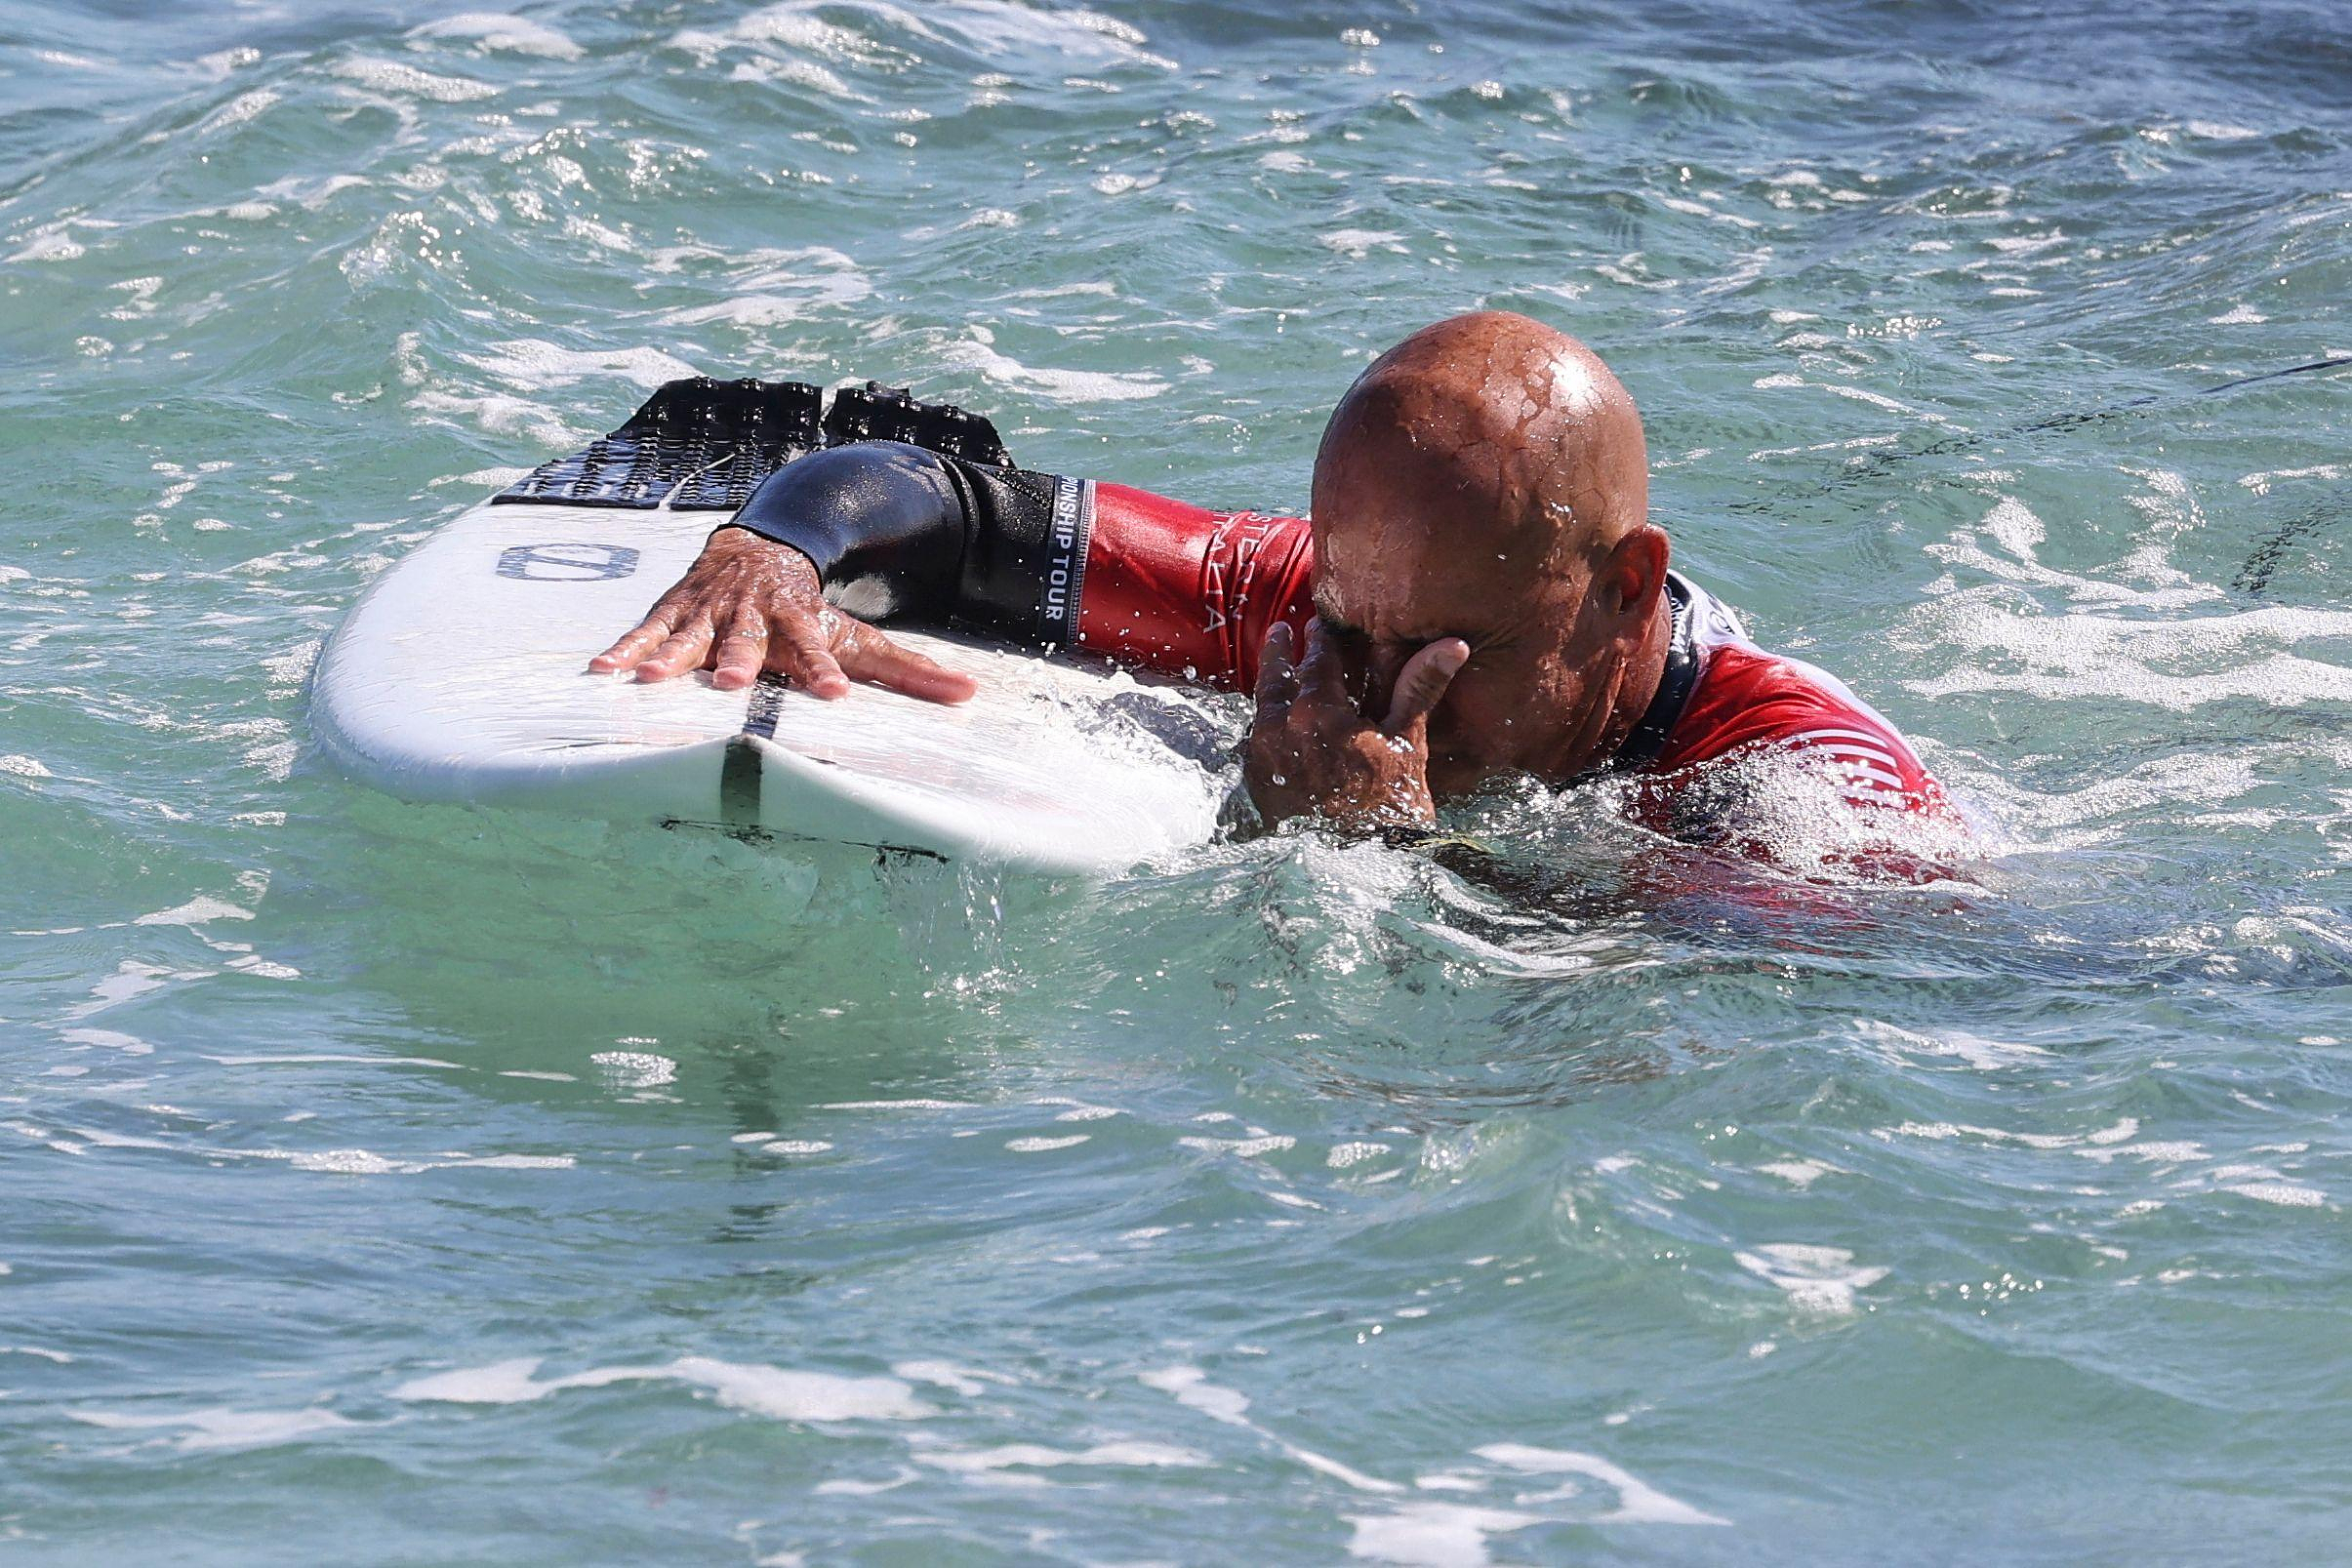 Surfing: eliminated from the pro tour, Kelly Slater close to saying goodbye